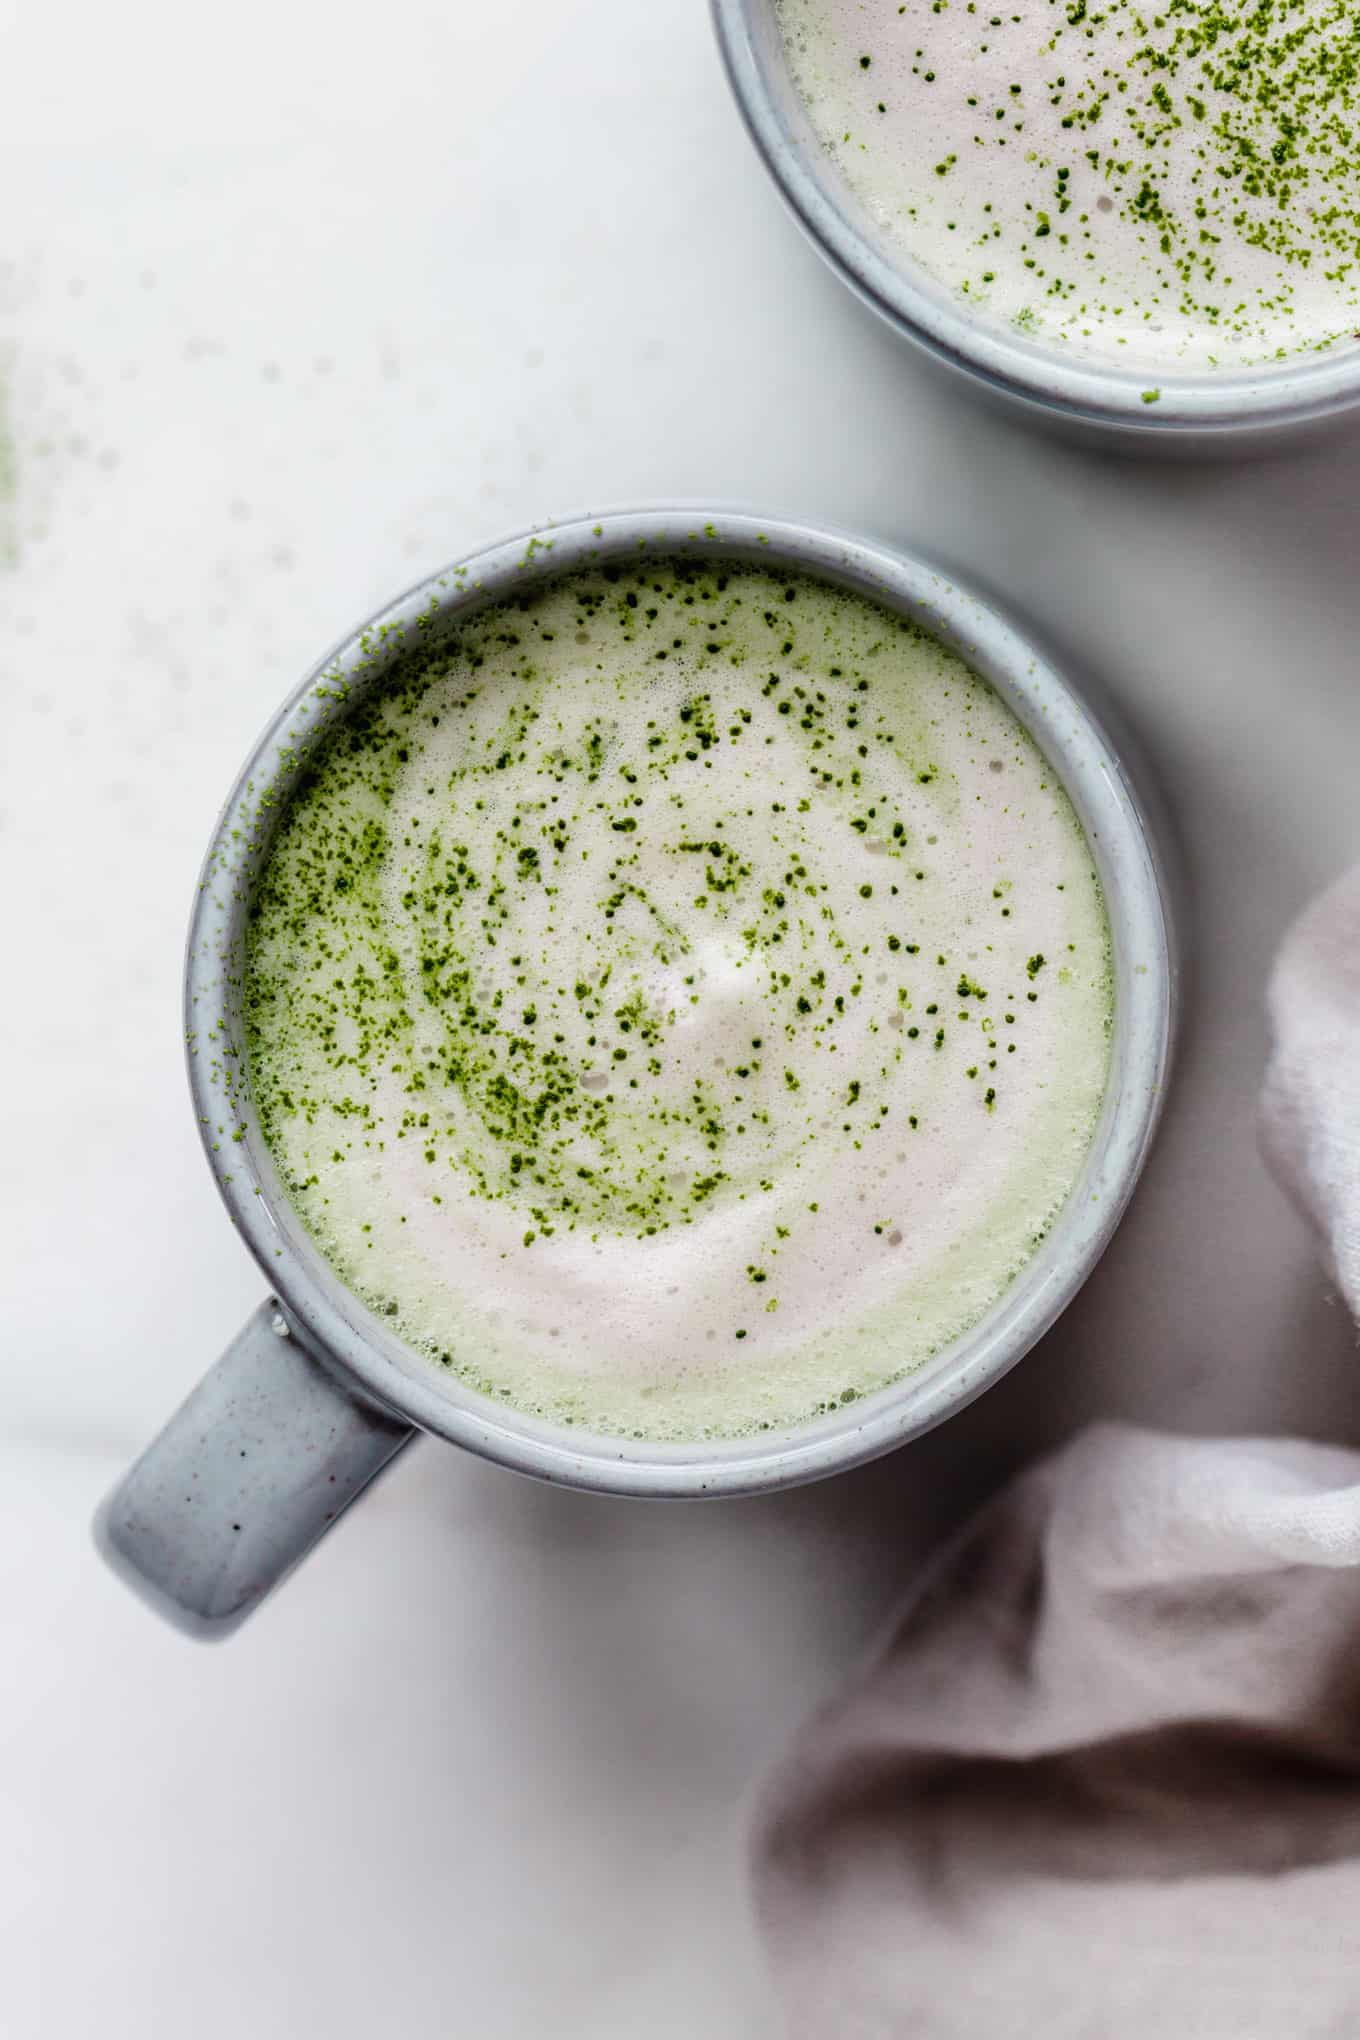 What Is A Matcha Latte?